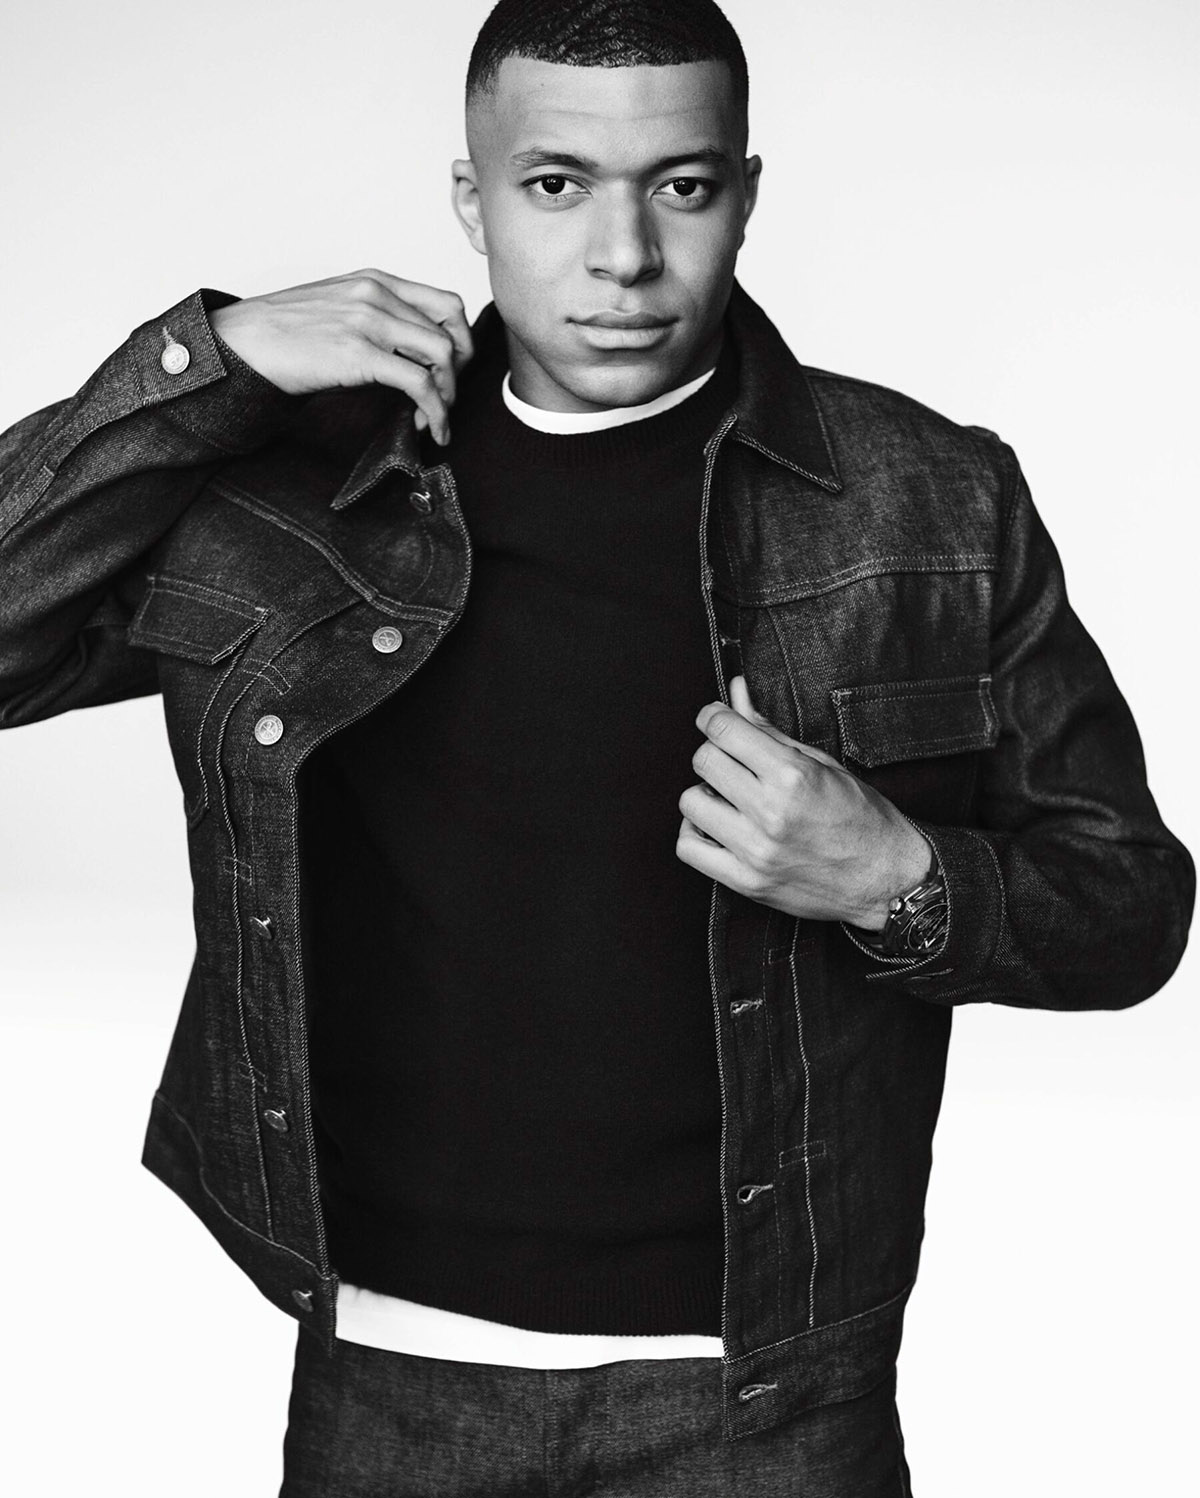 Kylian Mbappé covers Esquire UK July August 2021 by Nathaniel Goldberg